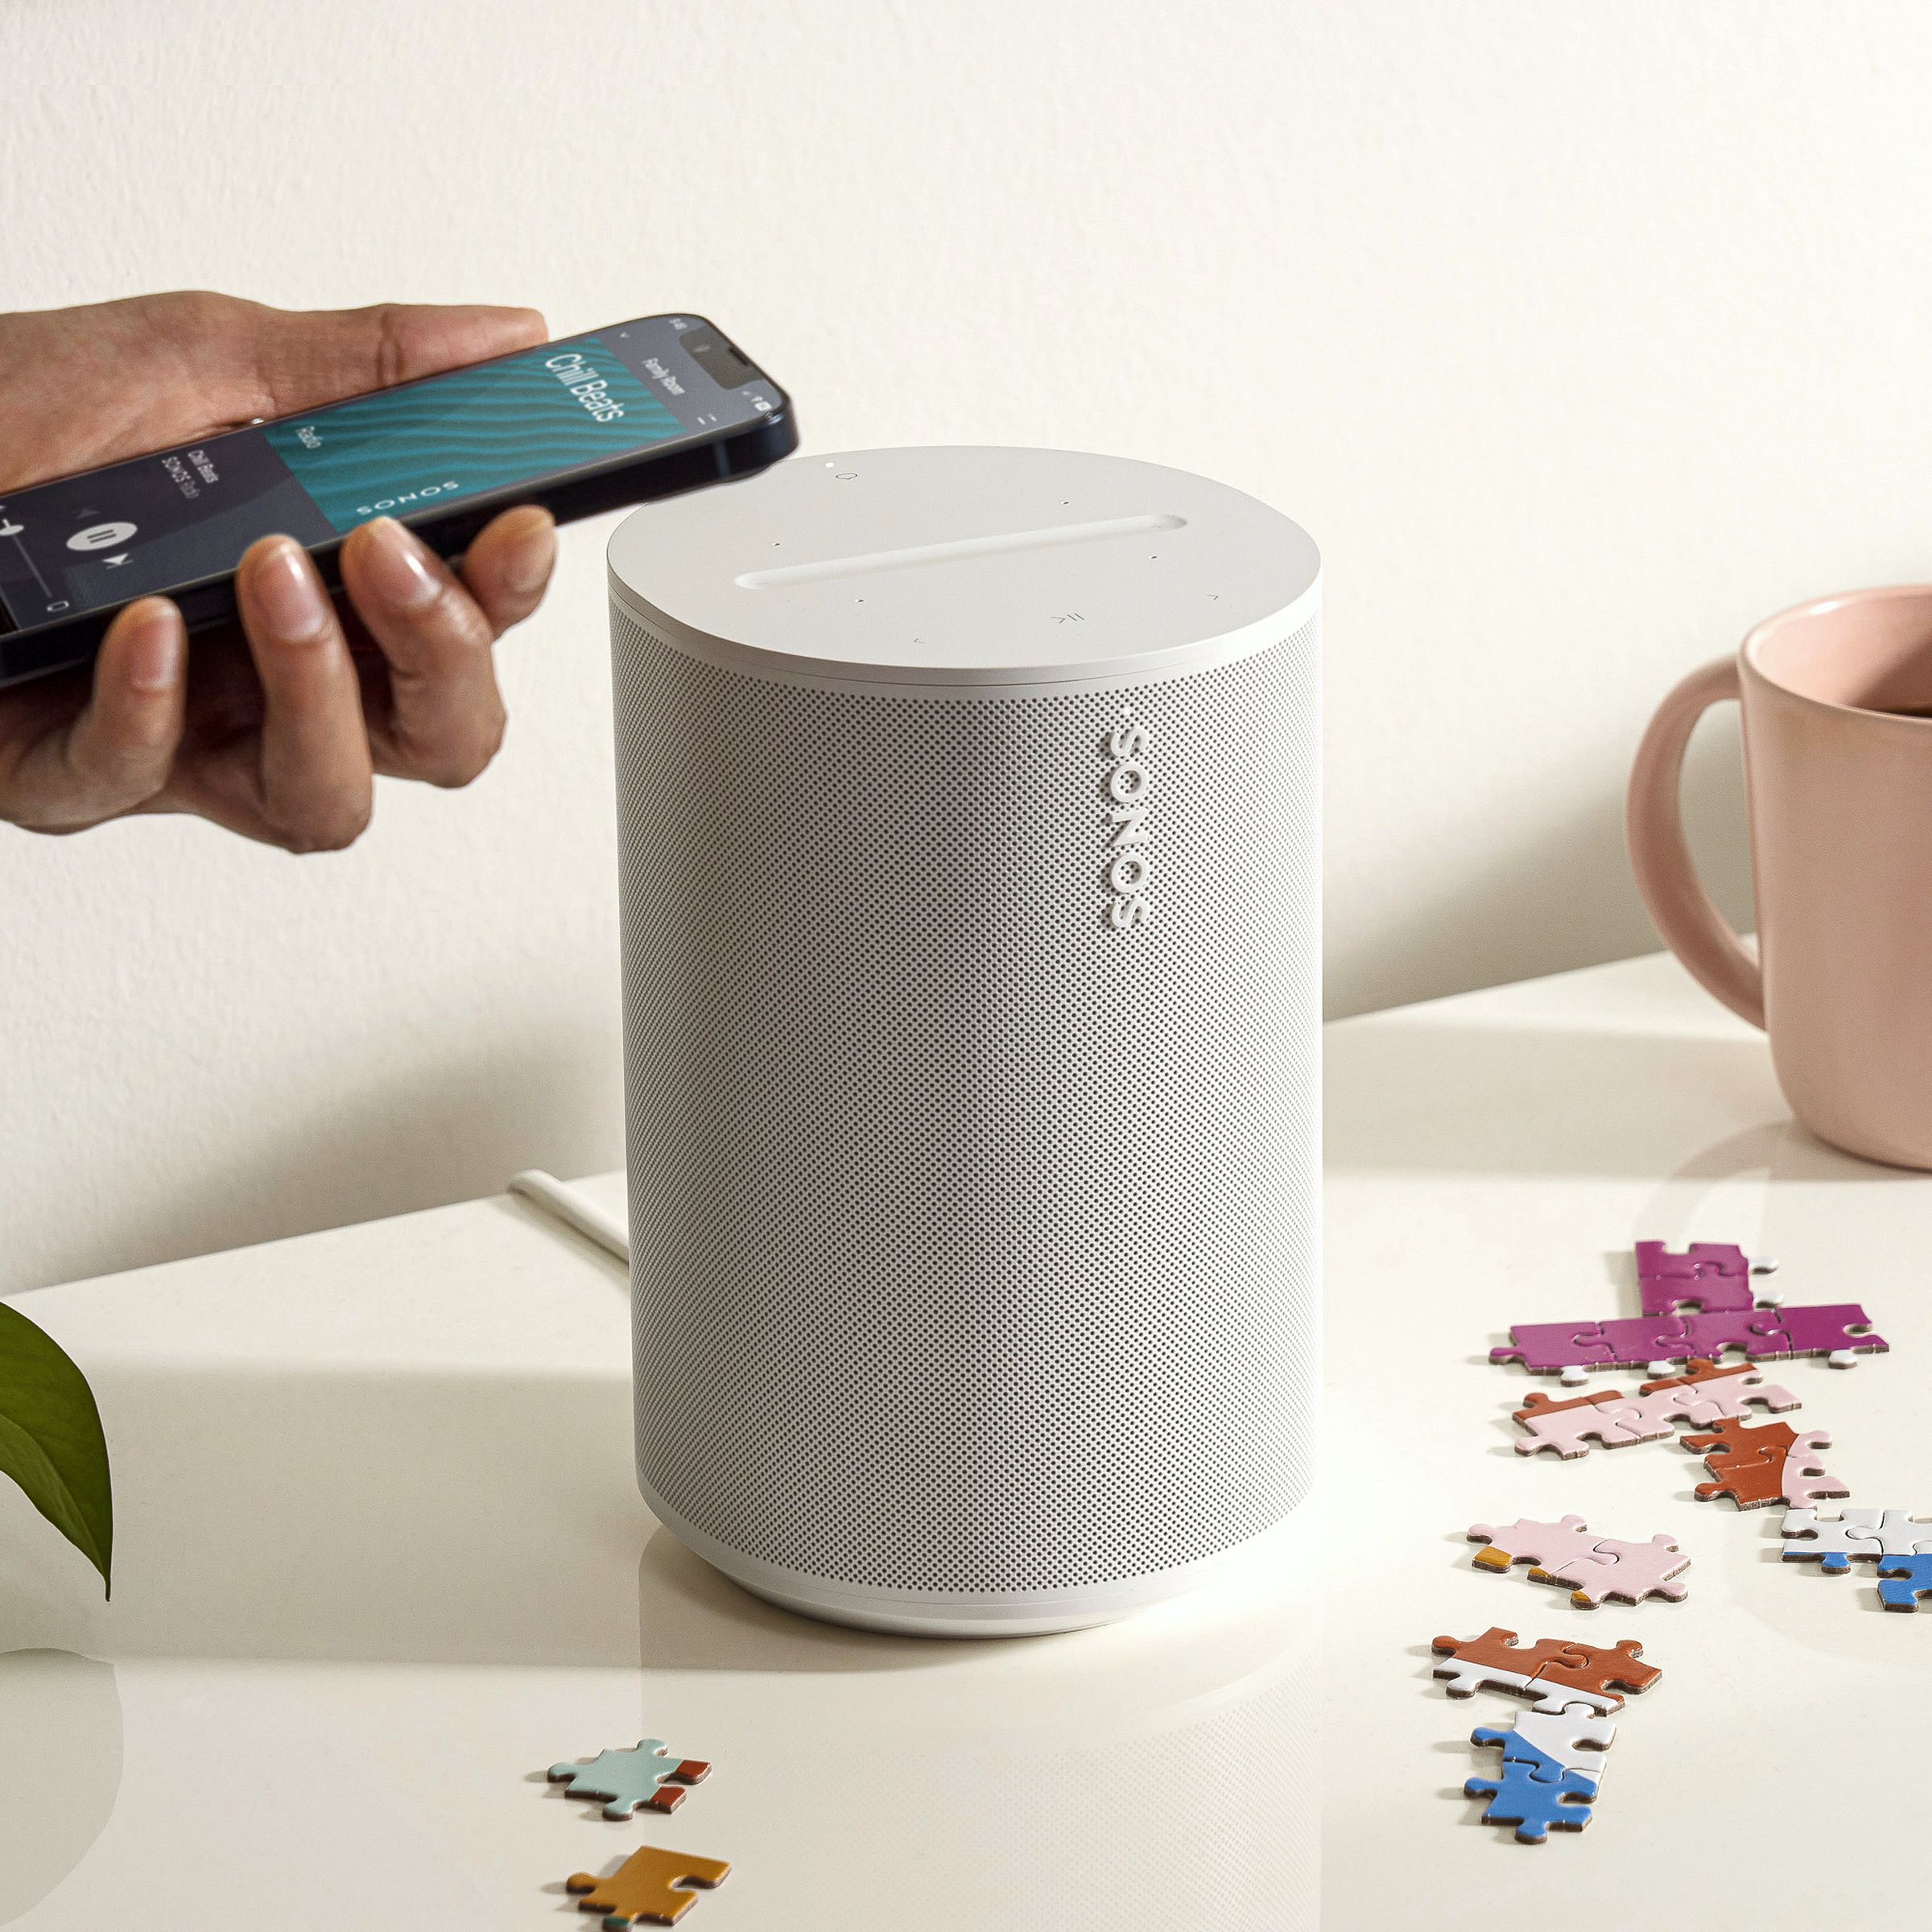 A marketing image of the Sonos Era 100 on a white table.